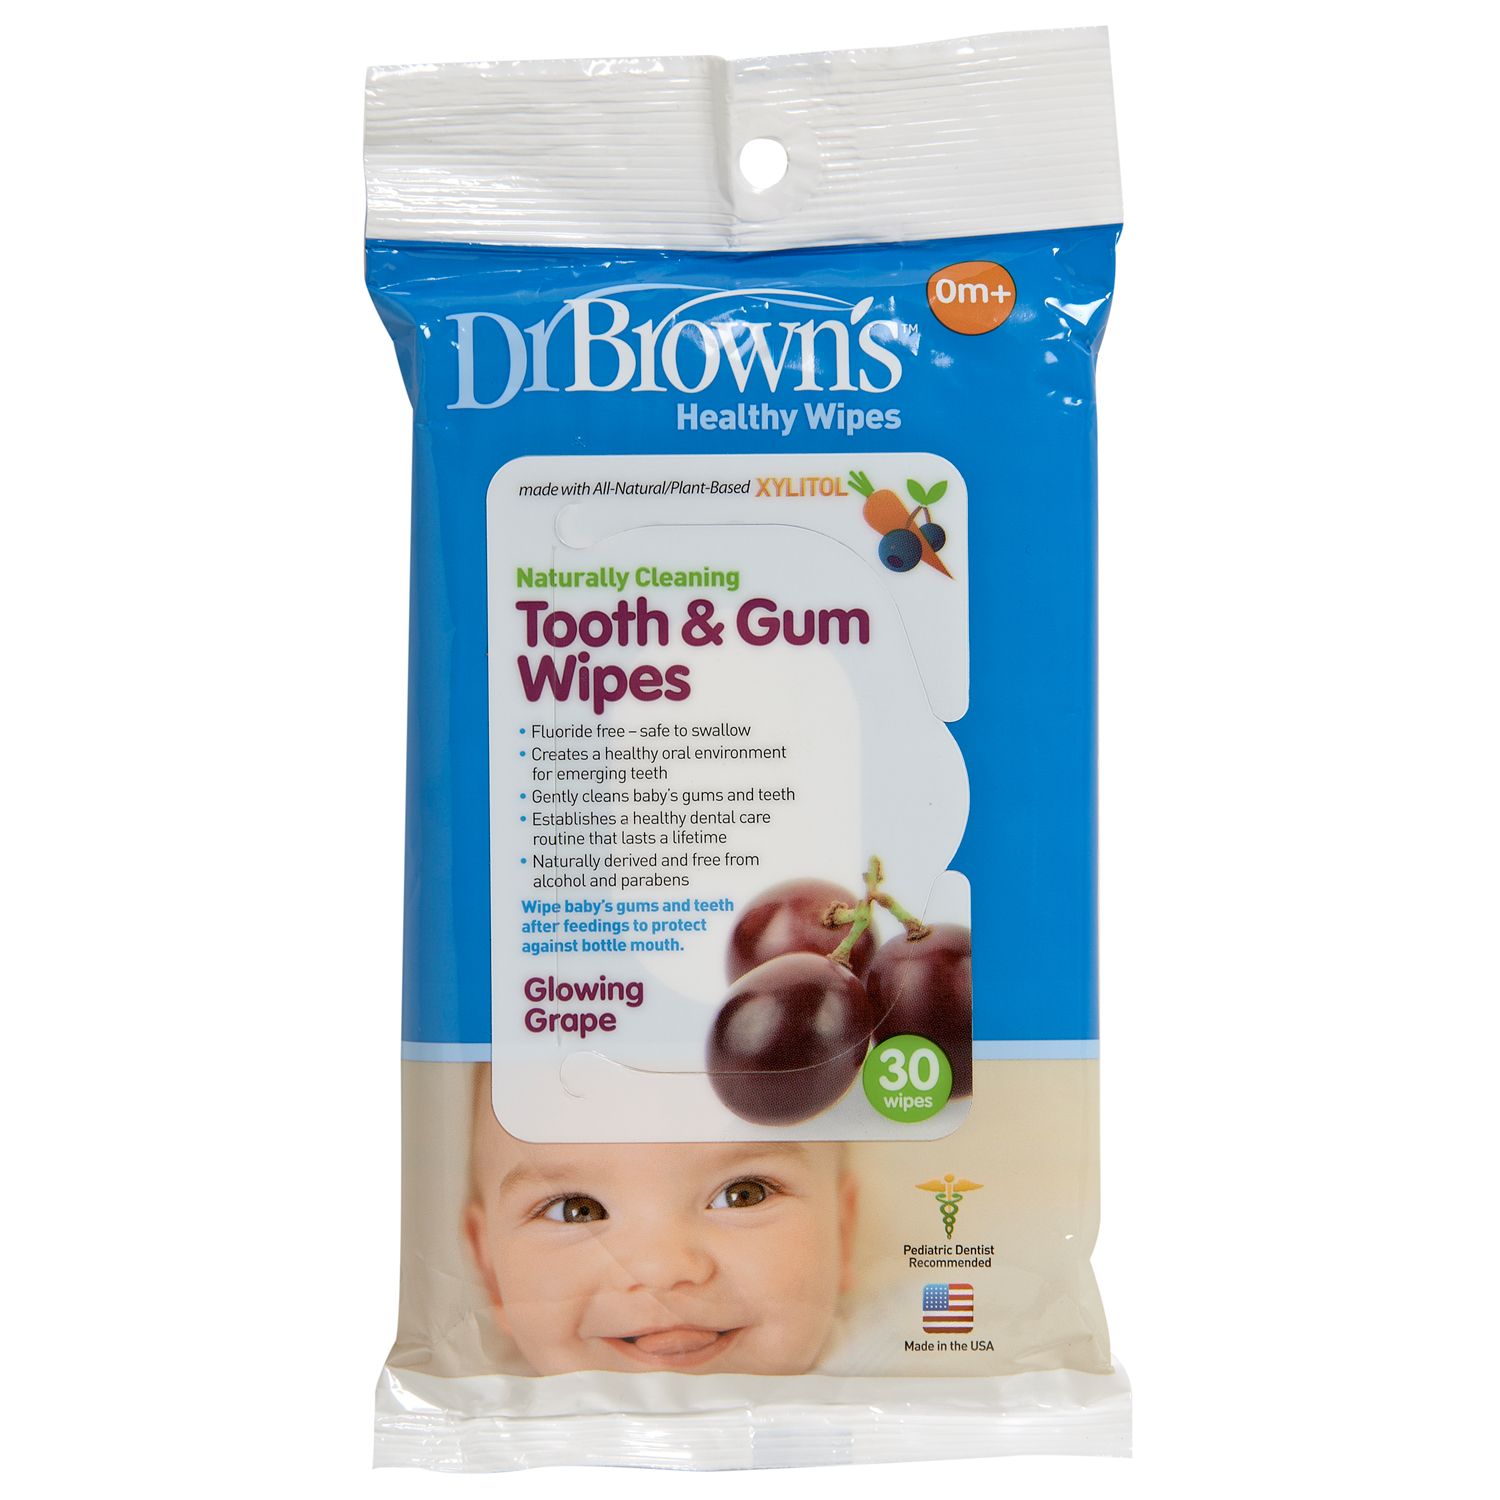 Image for Dr. Brown's 30-pk. Tooth & Gum Wipes at Kohl's.